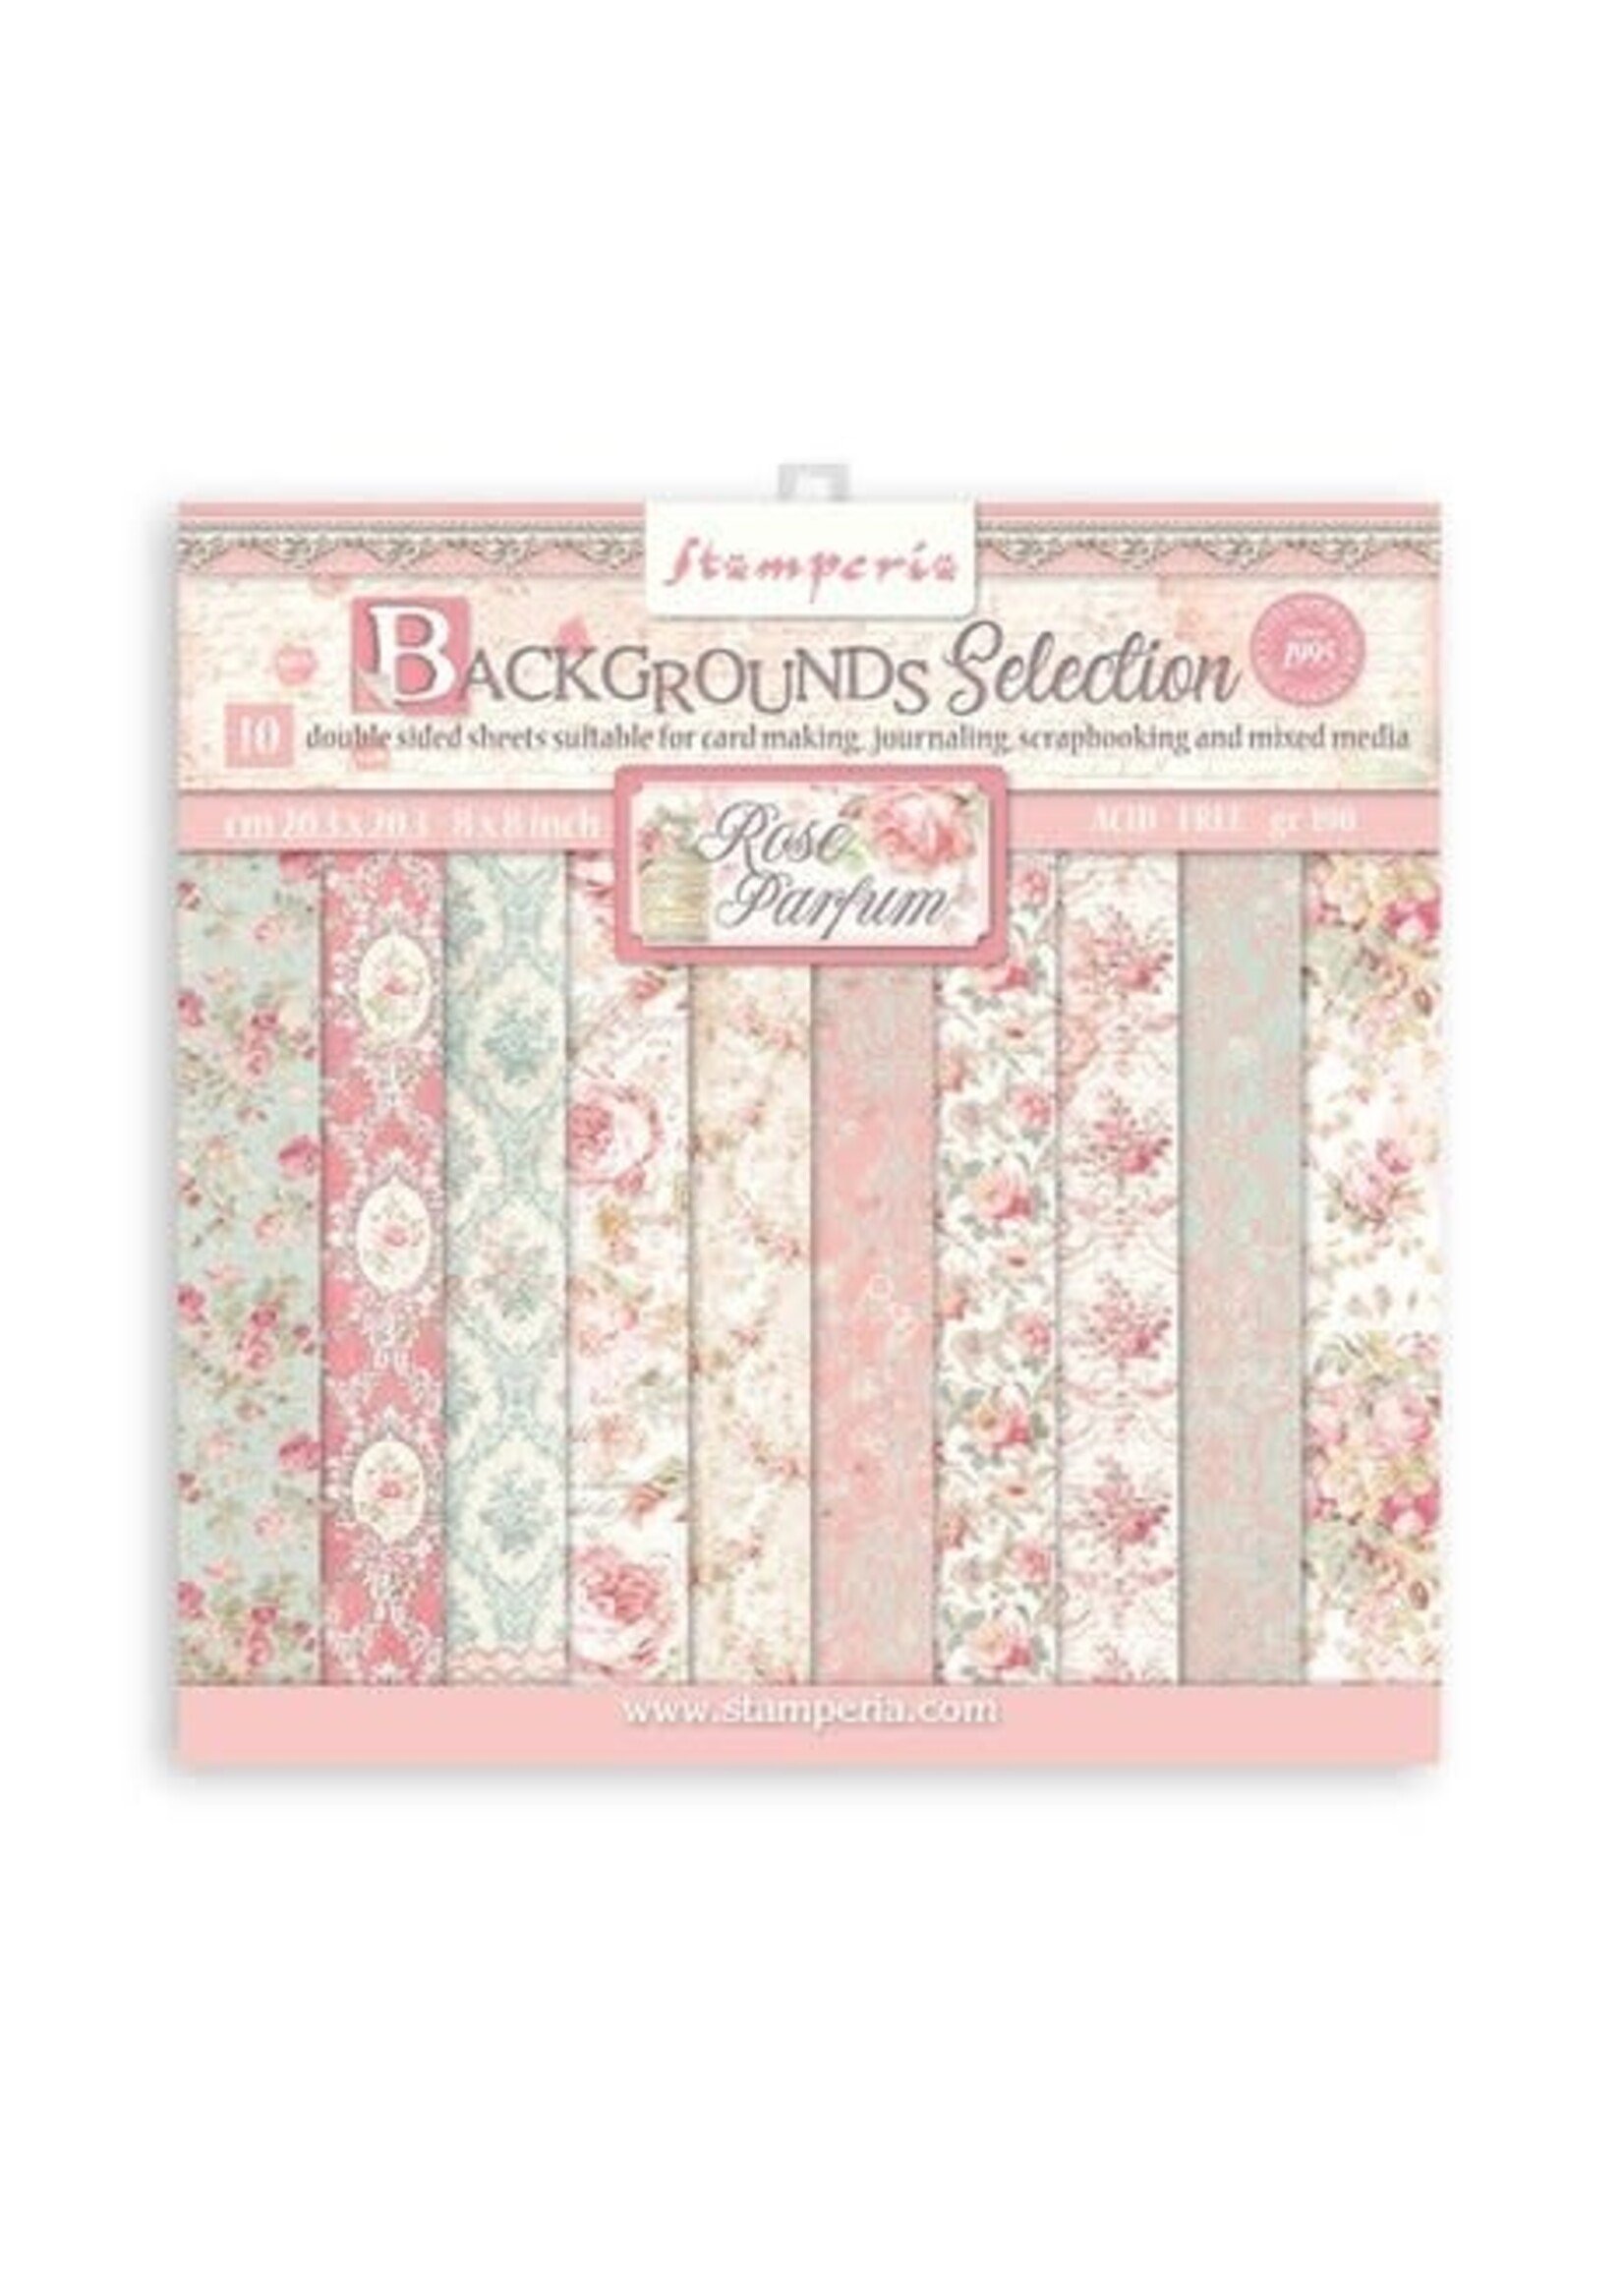 Stamperia Rose Parfum Backgrounds 8x8 Inch Paper Pack (SBBS74)